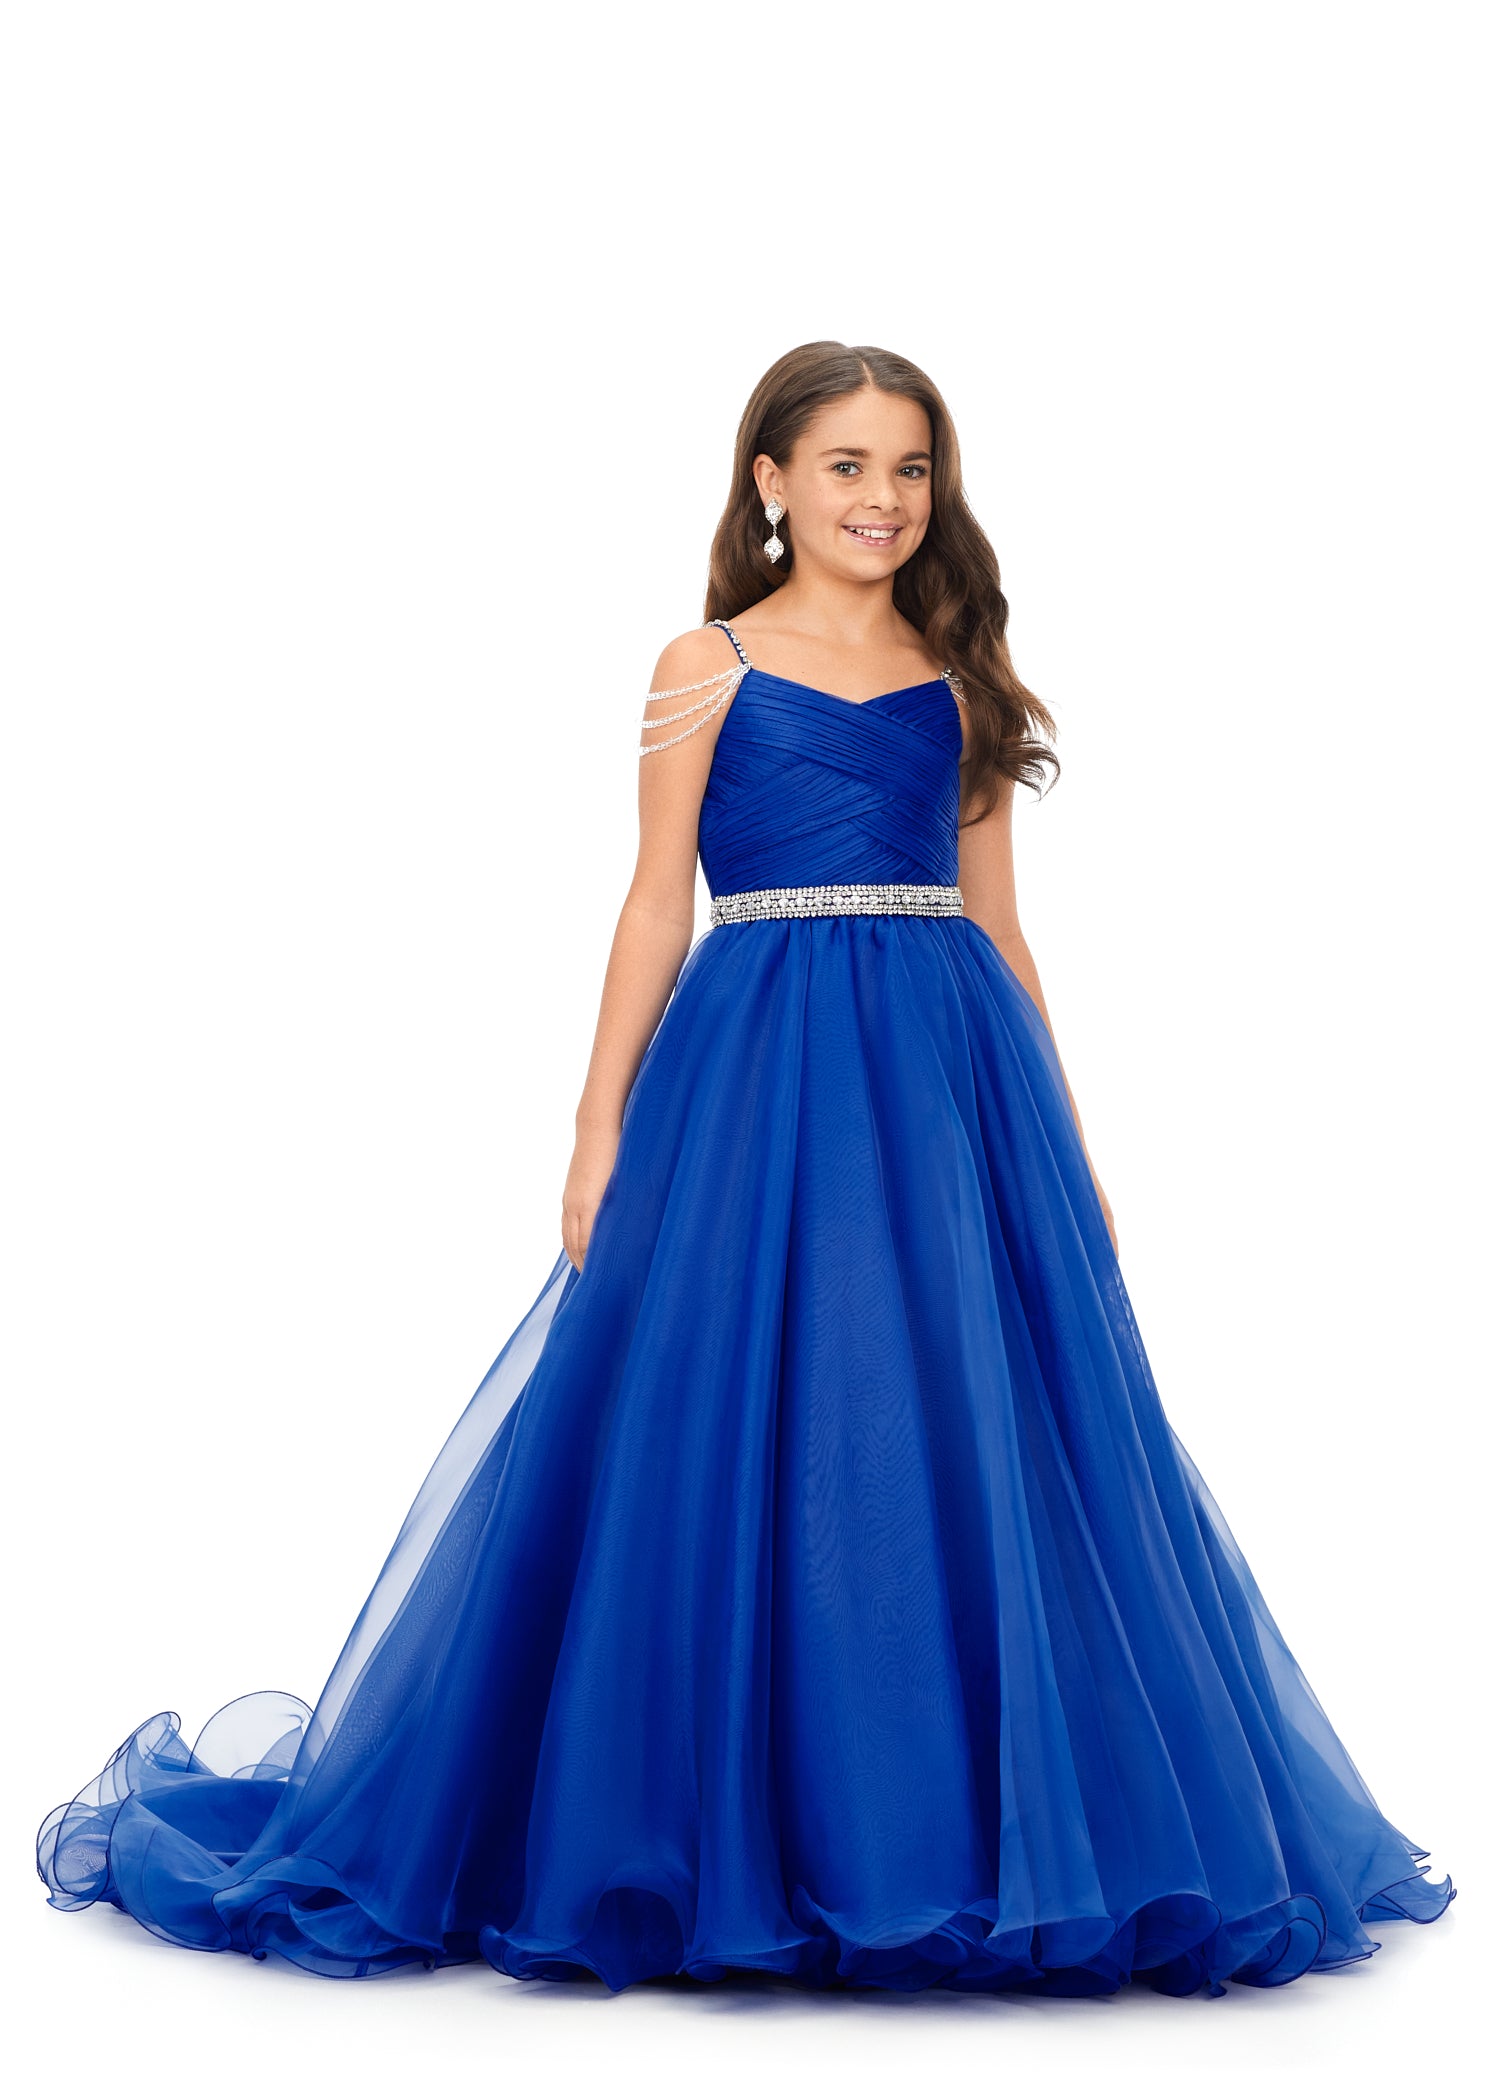 Ashley Lauren Kids 8170 Girls Organza Pageant Dress Ball Gown with Beaded Details royal blue